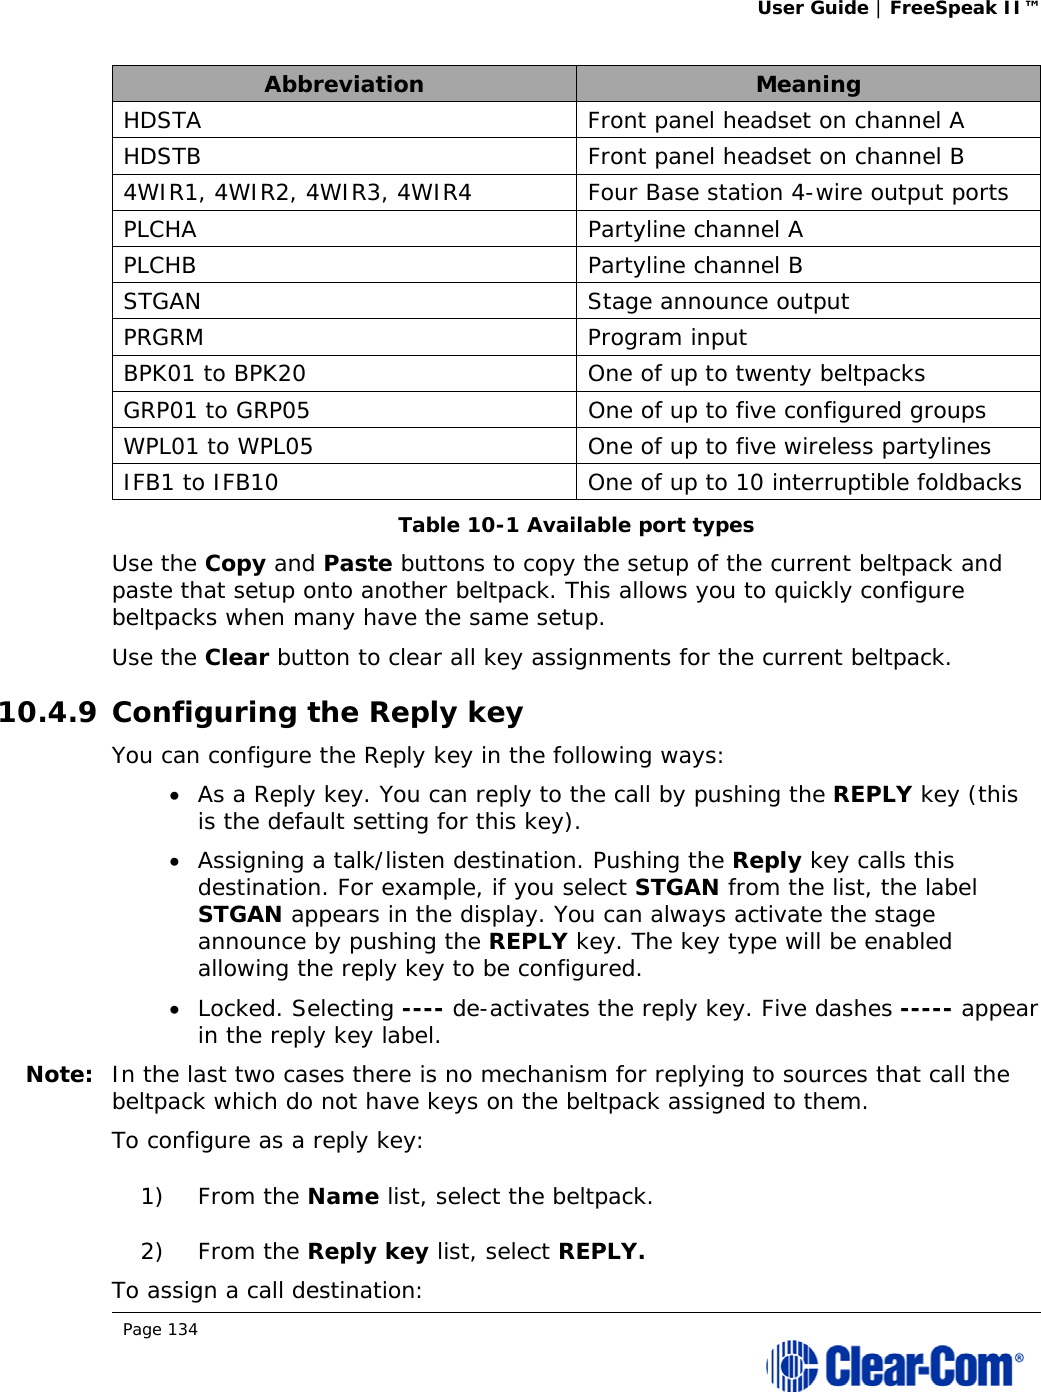 User Guide | FreeSpeak II™  Page 134  Abbreviation  Meaning HDSTA  Front panel headset on channel A HDSTB  Front panel headset on channel B 4WIR1, 4WIR2, 4WIR3, 4WIR4  Four Base station 4-wire output ports PLCHA Partyline channel A PLCHB Partyline channel B STGAN  Stage announce output PRGRM Program input BPK01 to BPK20  One of up to twenty beltpacks GRP01 to GRP05  One of up to five configured groups WPL01 to WPL05  One of up to five wireless partylines IFB1 to IFB10  One of up to 10 interruptible foldbacks Table 10-1 Available port types Use the Copy and Paste buttons to copy the setup of the current beltpack and paste that setup onto another beltpack. This allows you to quickly configure beltpacks when many have the same setup. Use the Clear button to clear all key assignments for the current beltpack. 10.4.9 Configuring the Reply key You can configure the Reply key in the following ways:  As a Reply key. You can reply to the call by pushing the REPLY key (this is the default setting for this key).  Assigning a talk/listen destination. Pushing the Reply key calls this destination. For example, if you select STGAN from the list, the label STGAN appears in the display. You can always activate the stage announce by pushing the REPLY key. The key type will be enabled allowing the reply key to be configured.  Locked. Selecting ---- de-activates the reply key. Five dashes ----- appear in the reply key label. Note: In the last two cases there is no mechanism for replying to sources that call the beltpack which do not have keys on the beltpack assigned to them. To configure as a reply key: 1) From the Name list, select the beltpack. 2) From the Reply key list, select REPLY. To assign a call destination: 